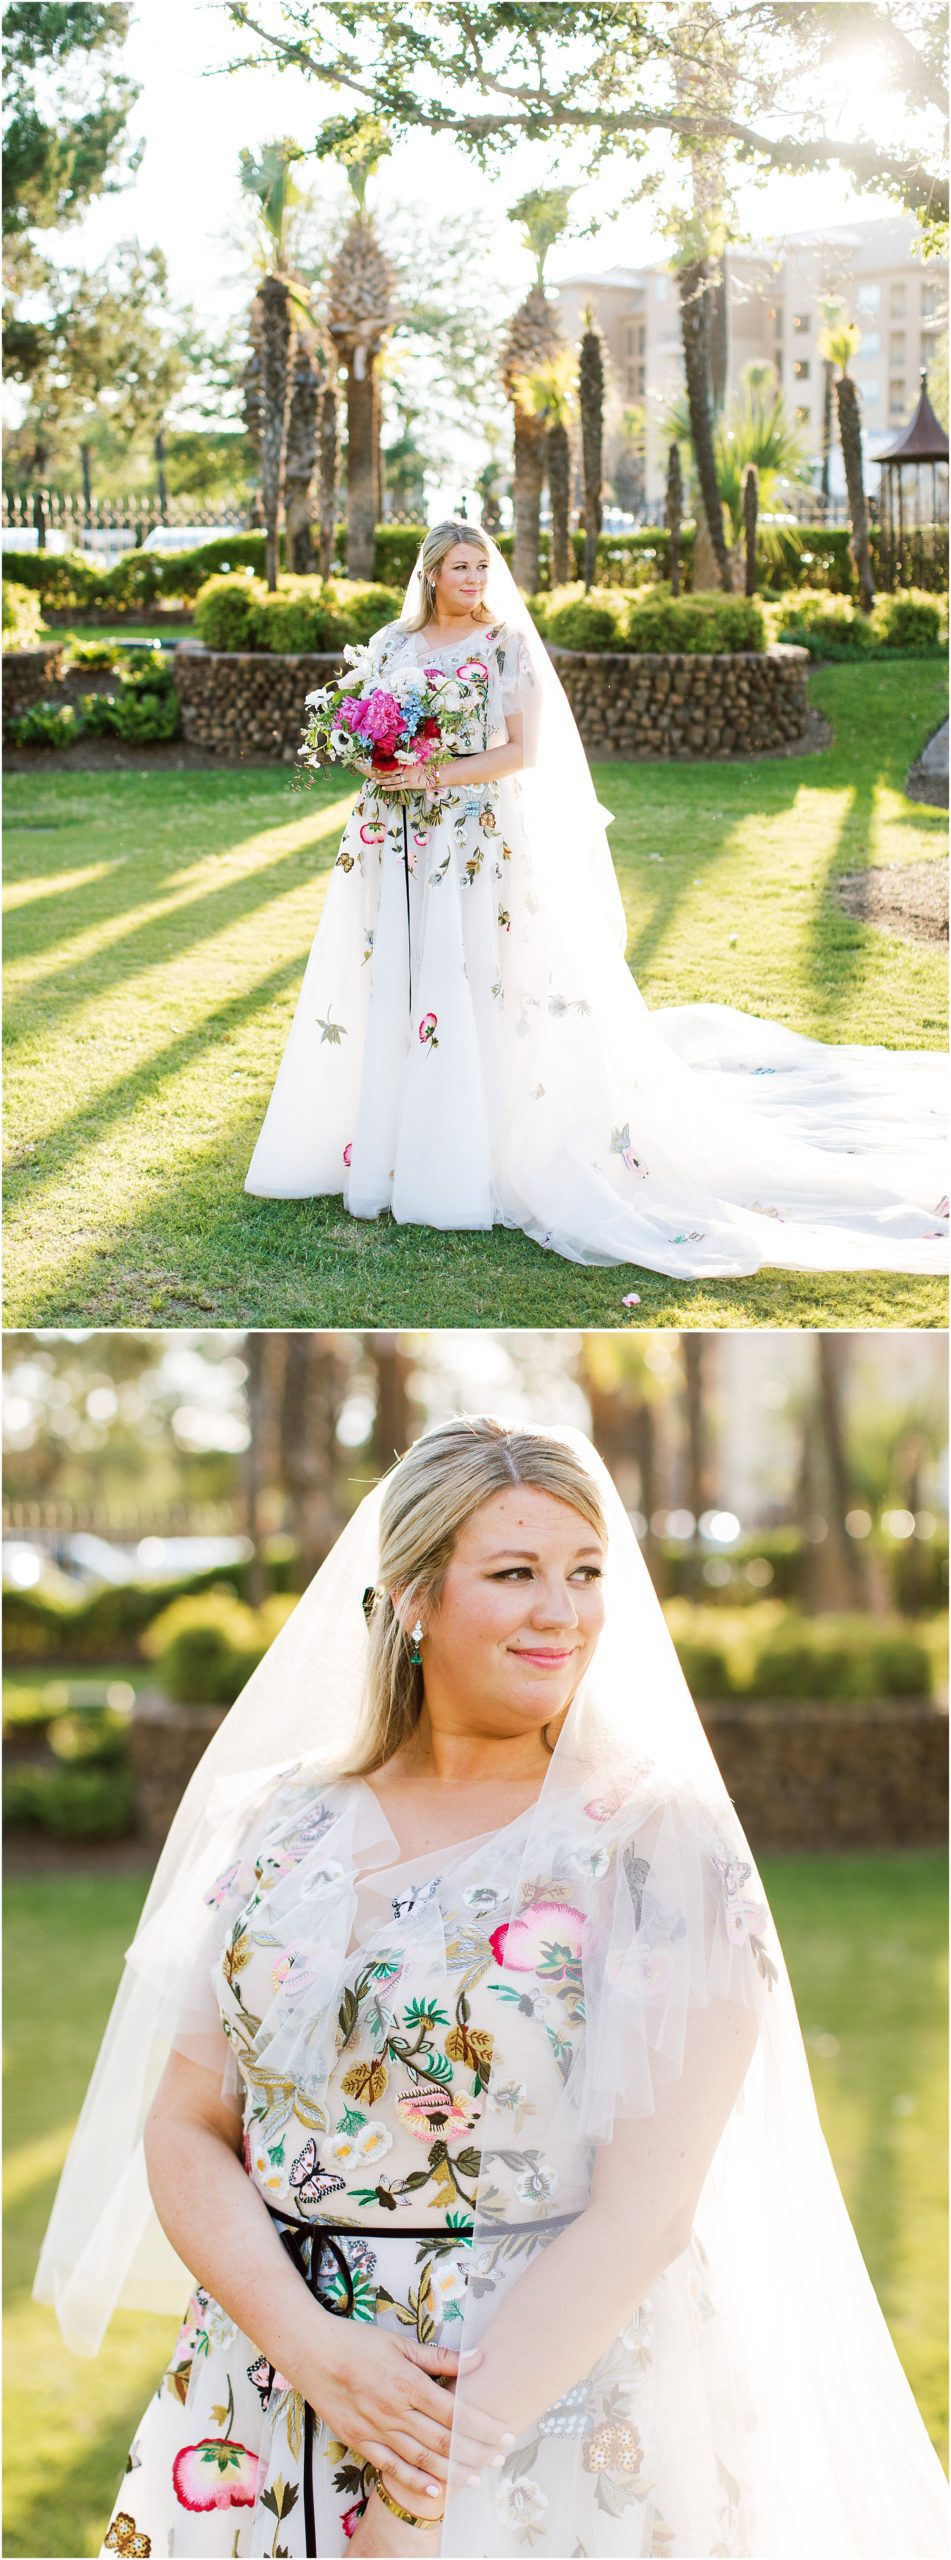 Bride in Monique Lhuillier with colorful flowers and butterfllies